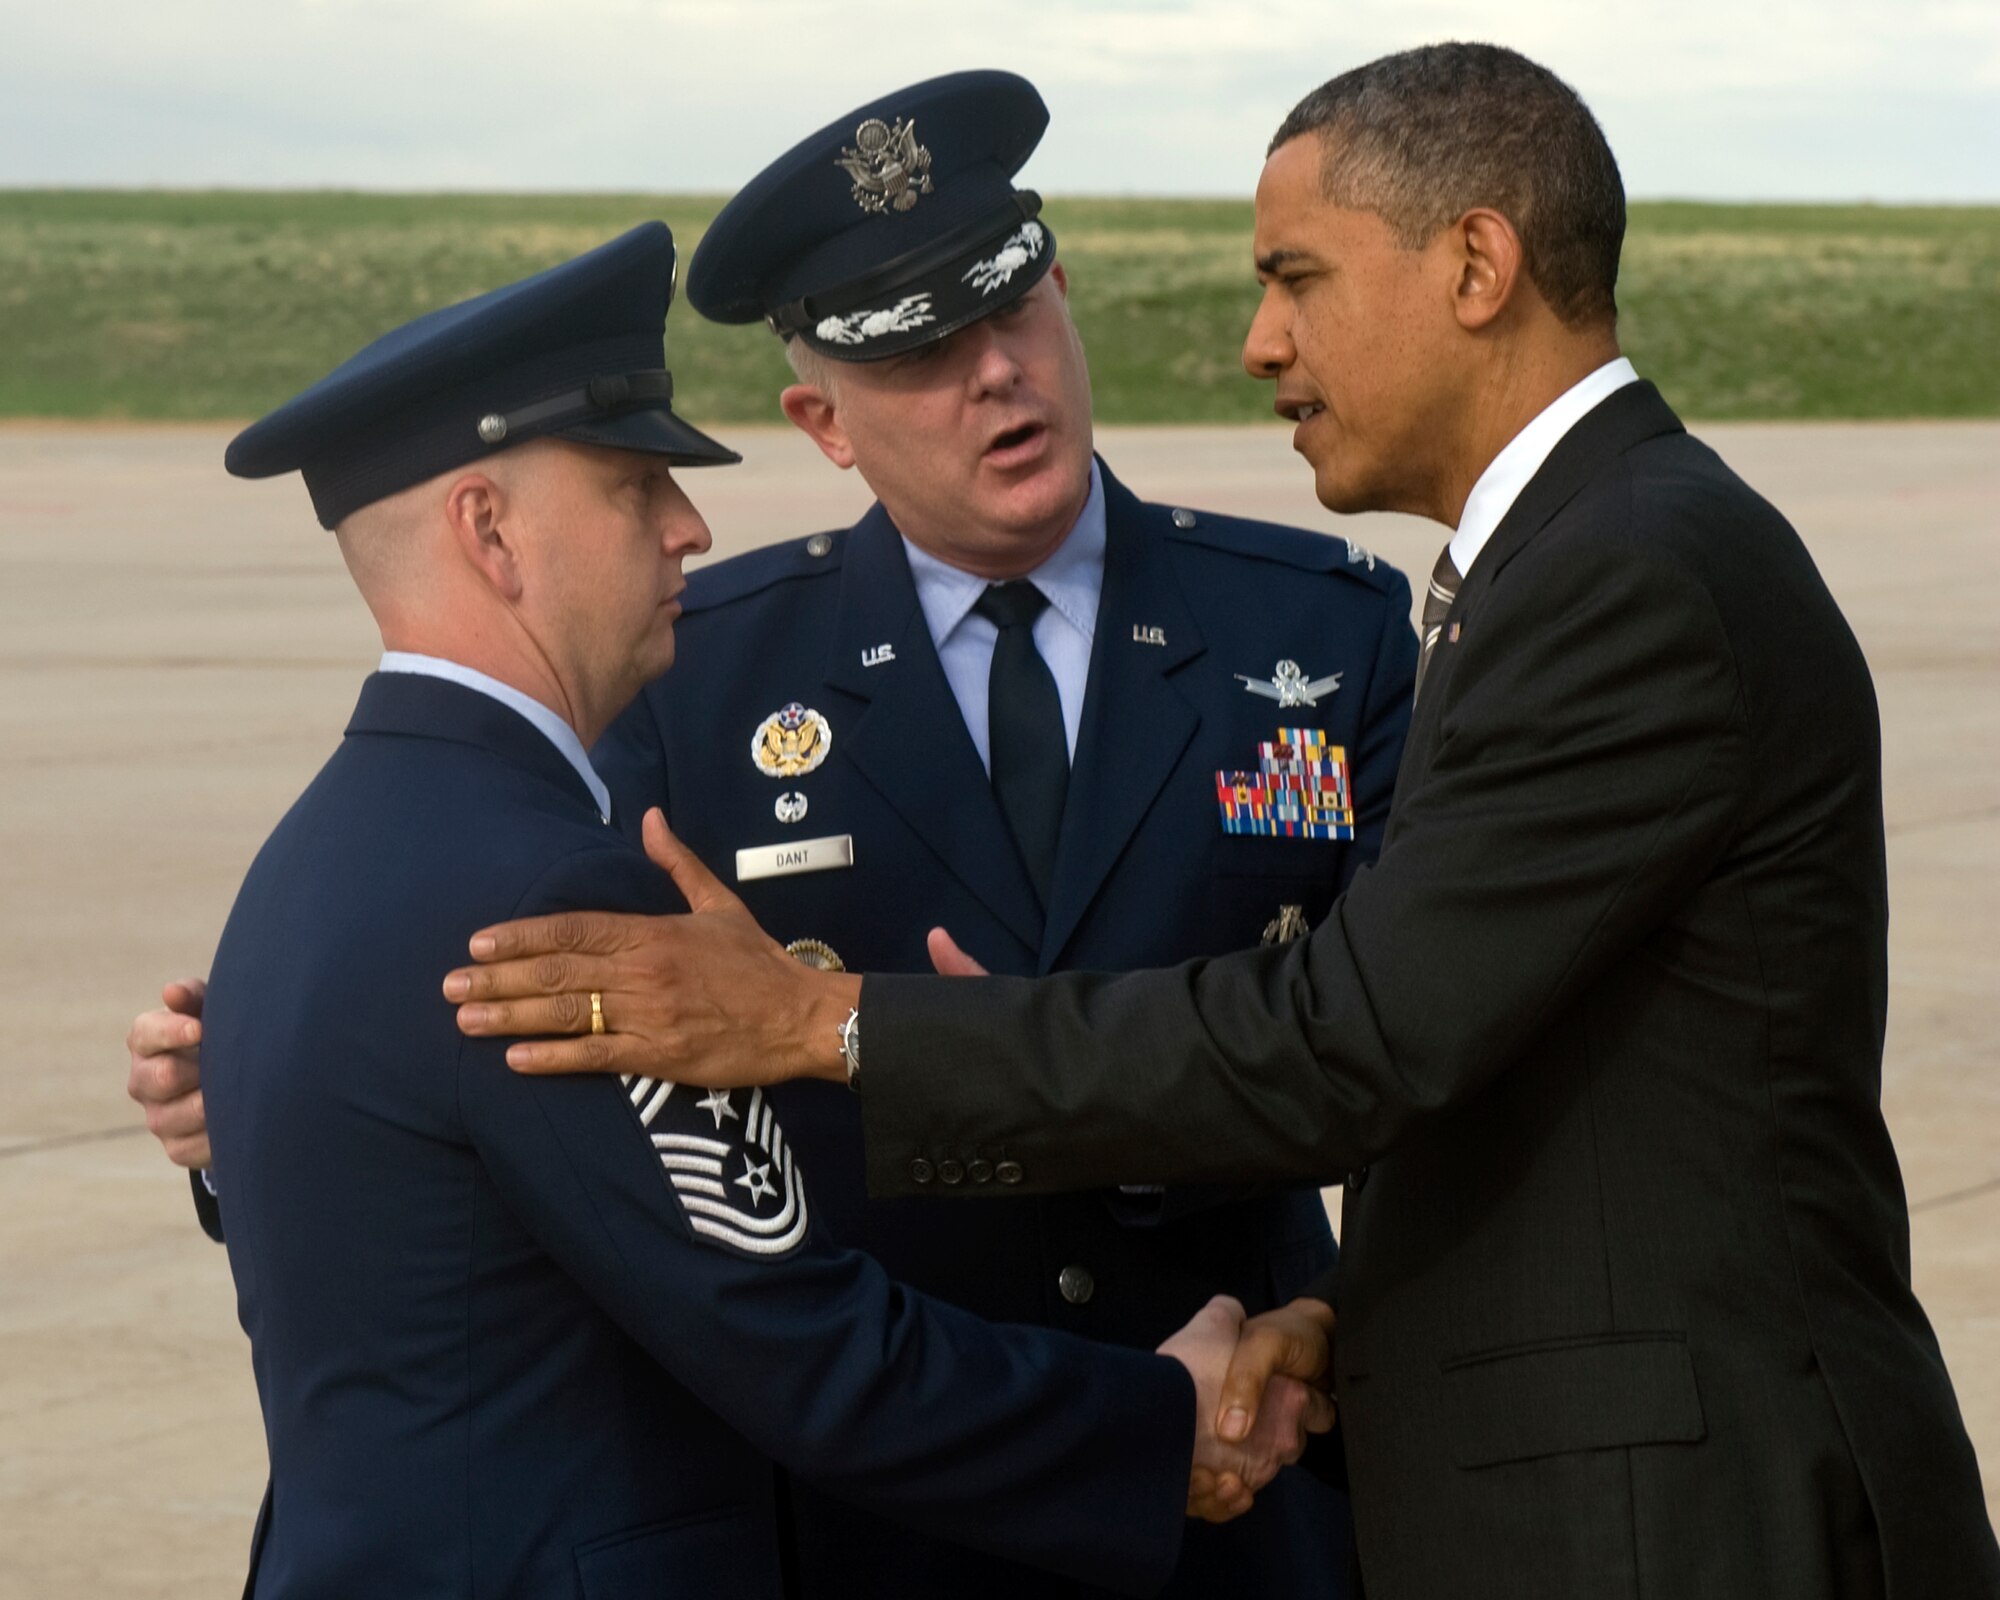 BUCKLEY AIR FORCE BASE, Colo. – President Barack Obama speaks with Chief Master Sgt. William Ward, 460th Space Wing command chief, left, and Col. Daniel Dant, 460th Space Wing commander, April 24, 2012. Obama will speak at the University of Colorado Boulder concerning student loan interest rates. (U.S. Air Force photo by Airman 1st Class Riley Johnson)